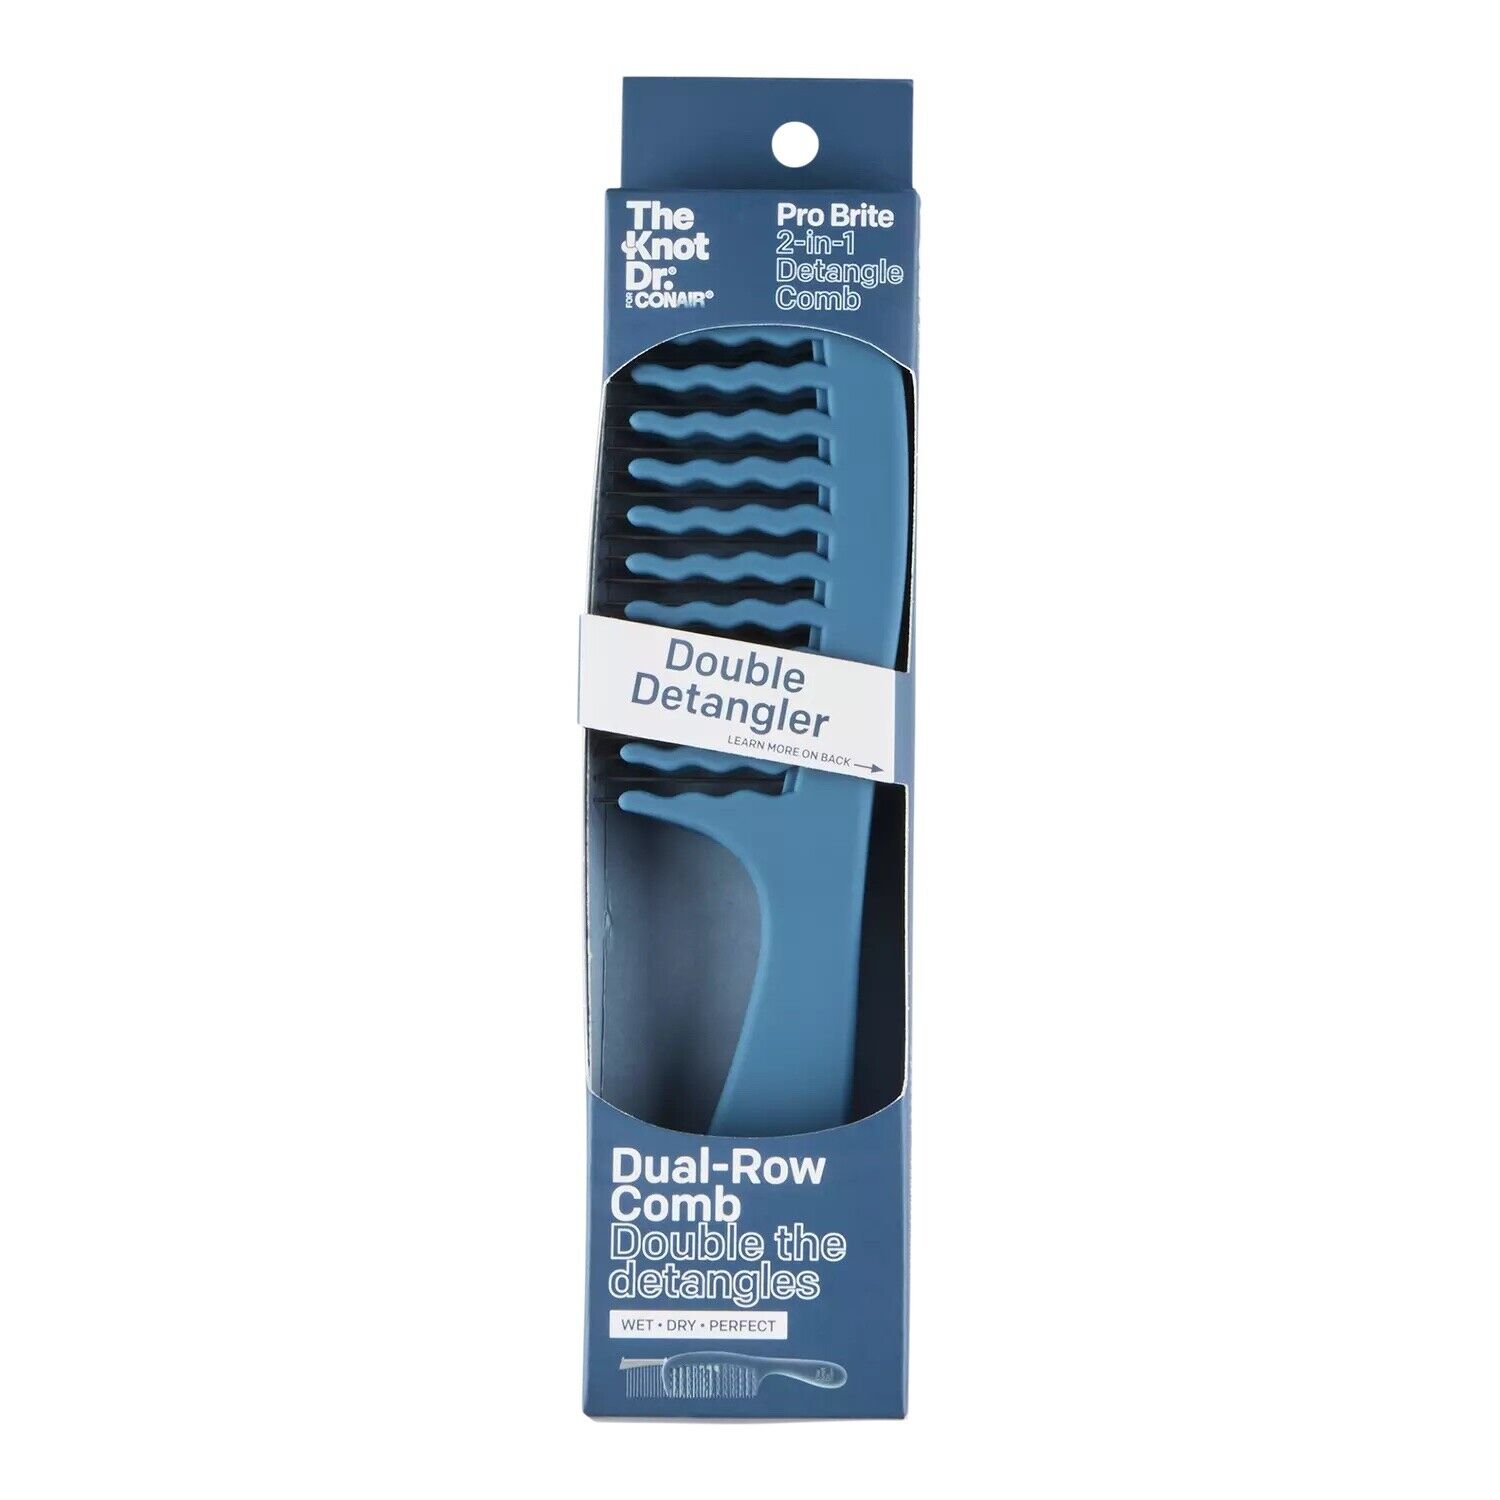 he Knot Dr. For Conair Pro Brite 2-in-1 Detangle Dual-Row Comb, Blue, 1-Piece UPC:074108931733